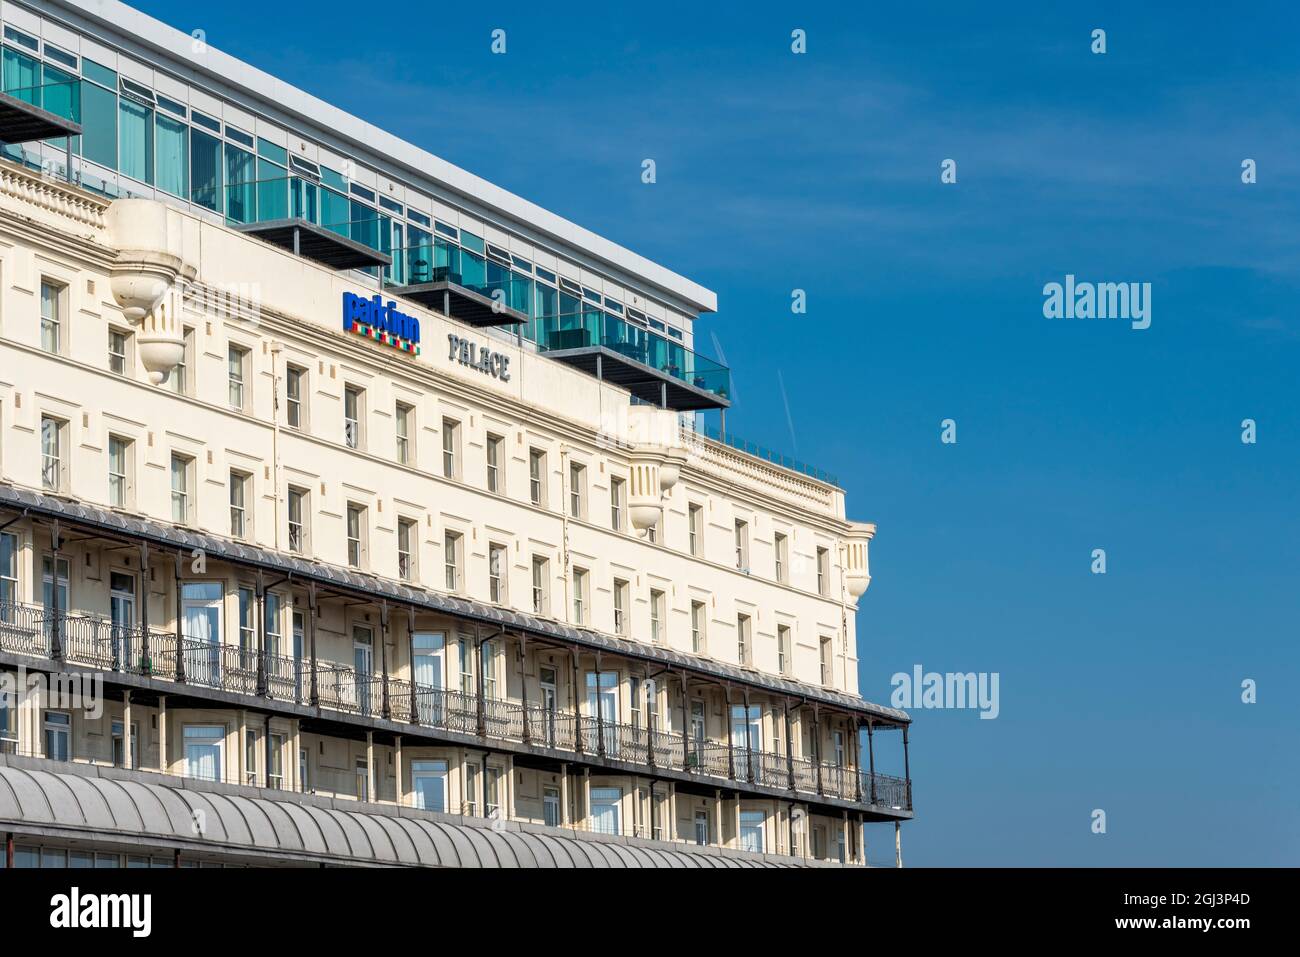 Park Inn, Radisson Palace Hotel in Southend on Sea, Essex, UK, in bright sunny weather. Historic cliff top accommodation. Blue sky Stock Photo